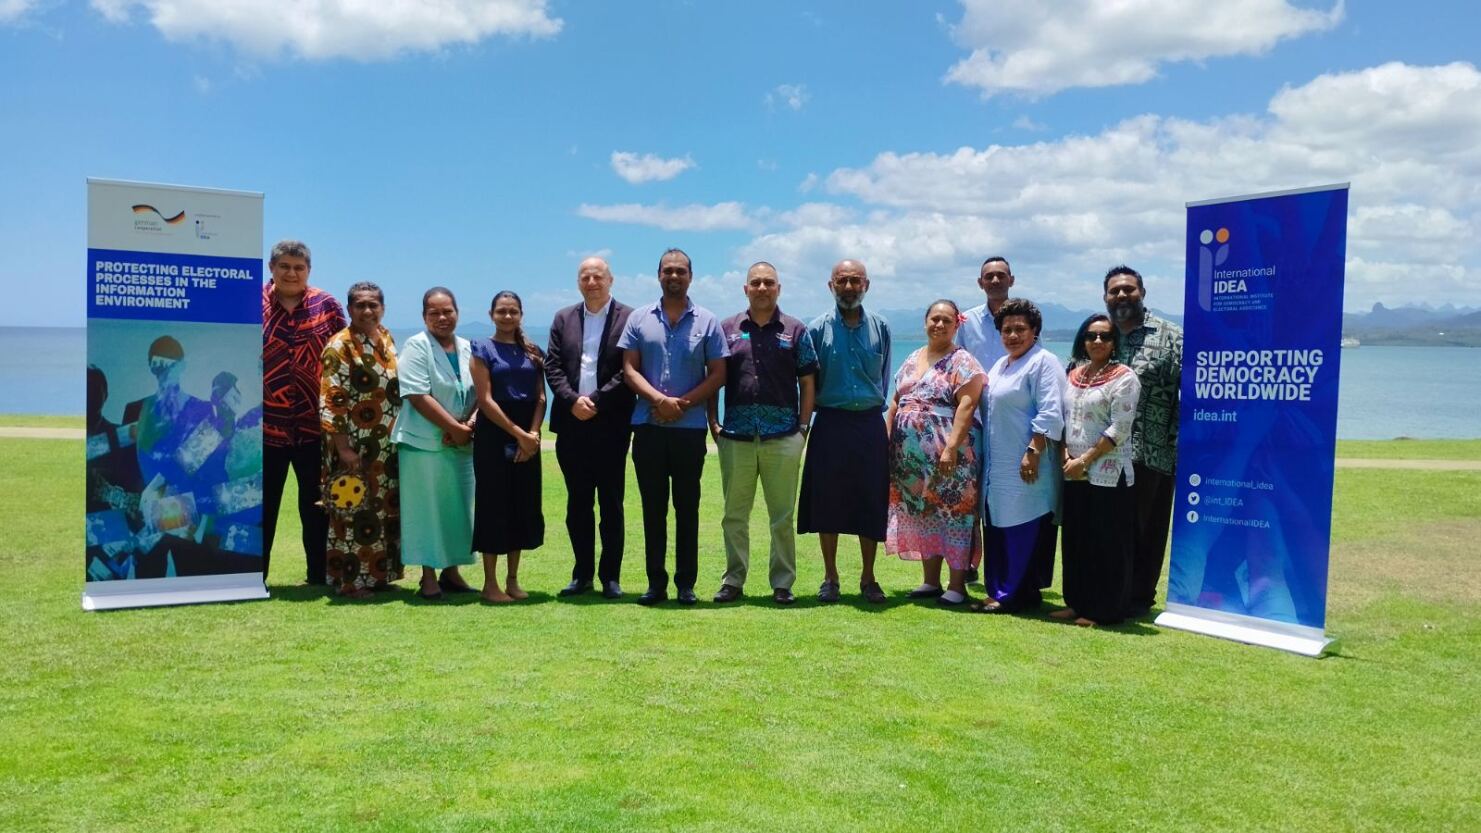 The participants of the Fiji Working Group on Protecting Electoral Processes in the Information Environment in 2023. Credit: International IDEA